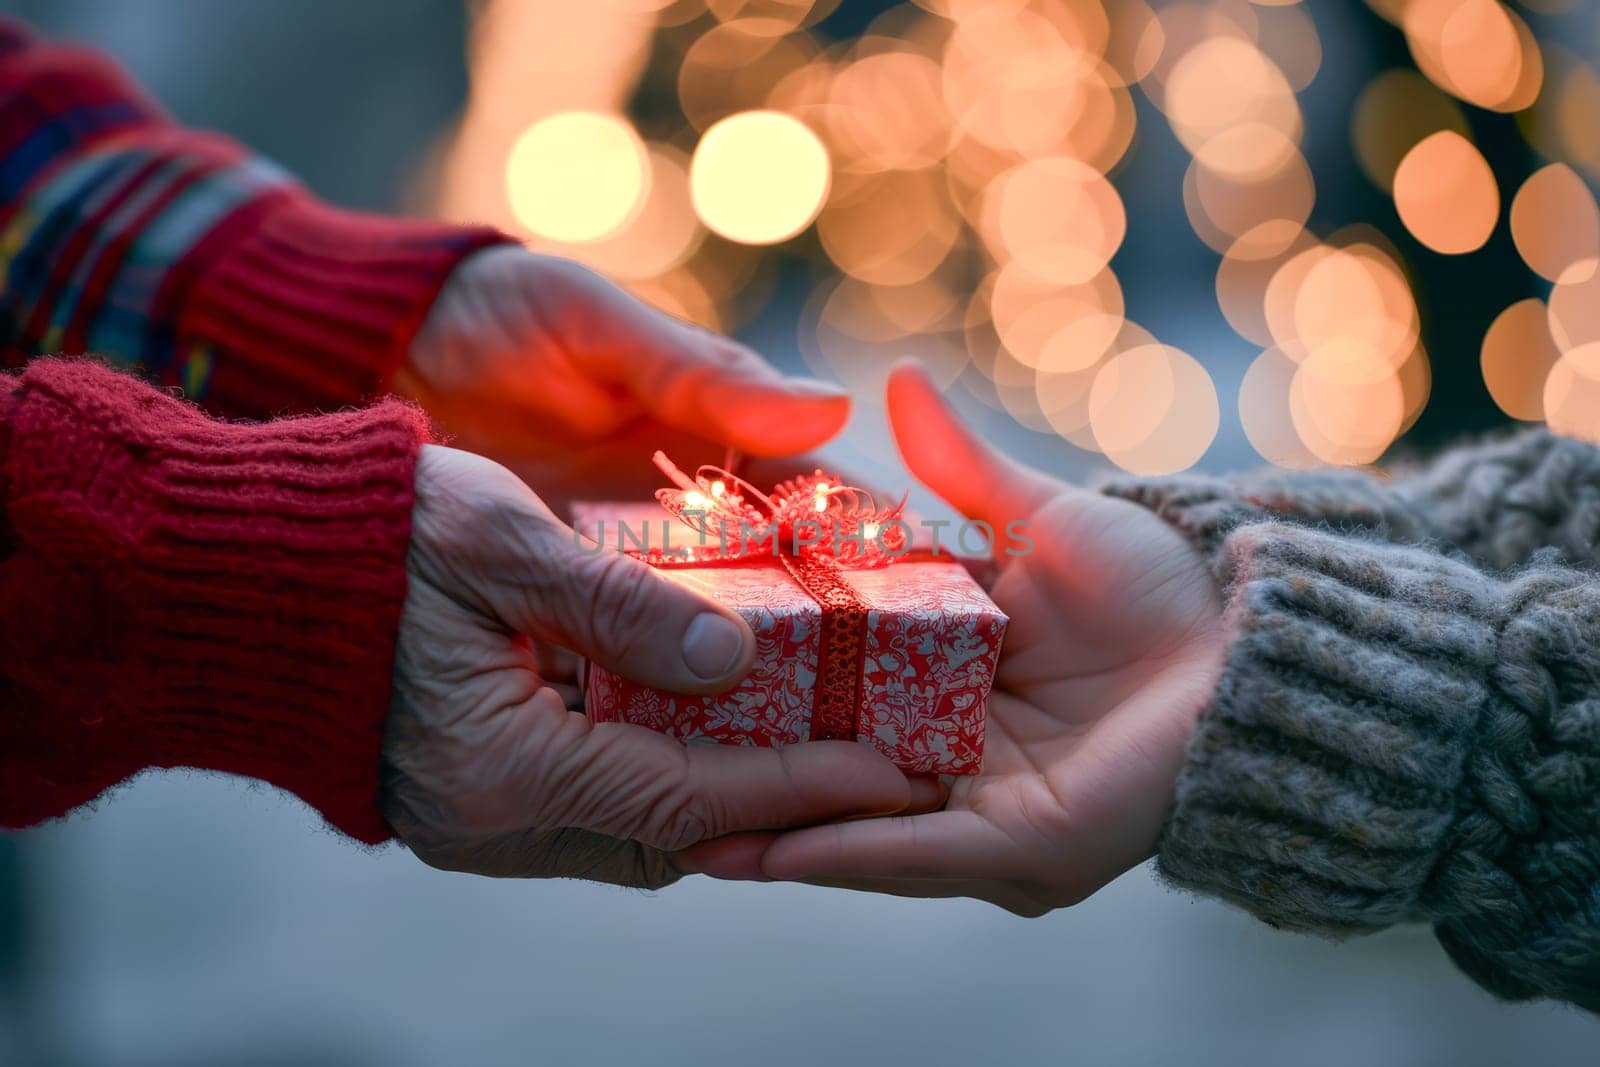 Two individuals holding a small gift box while illuminated lights create a backdrop.